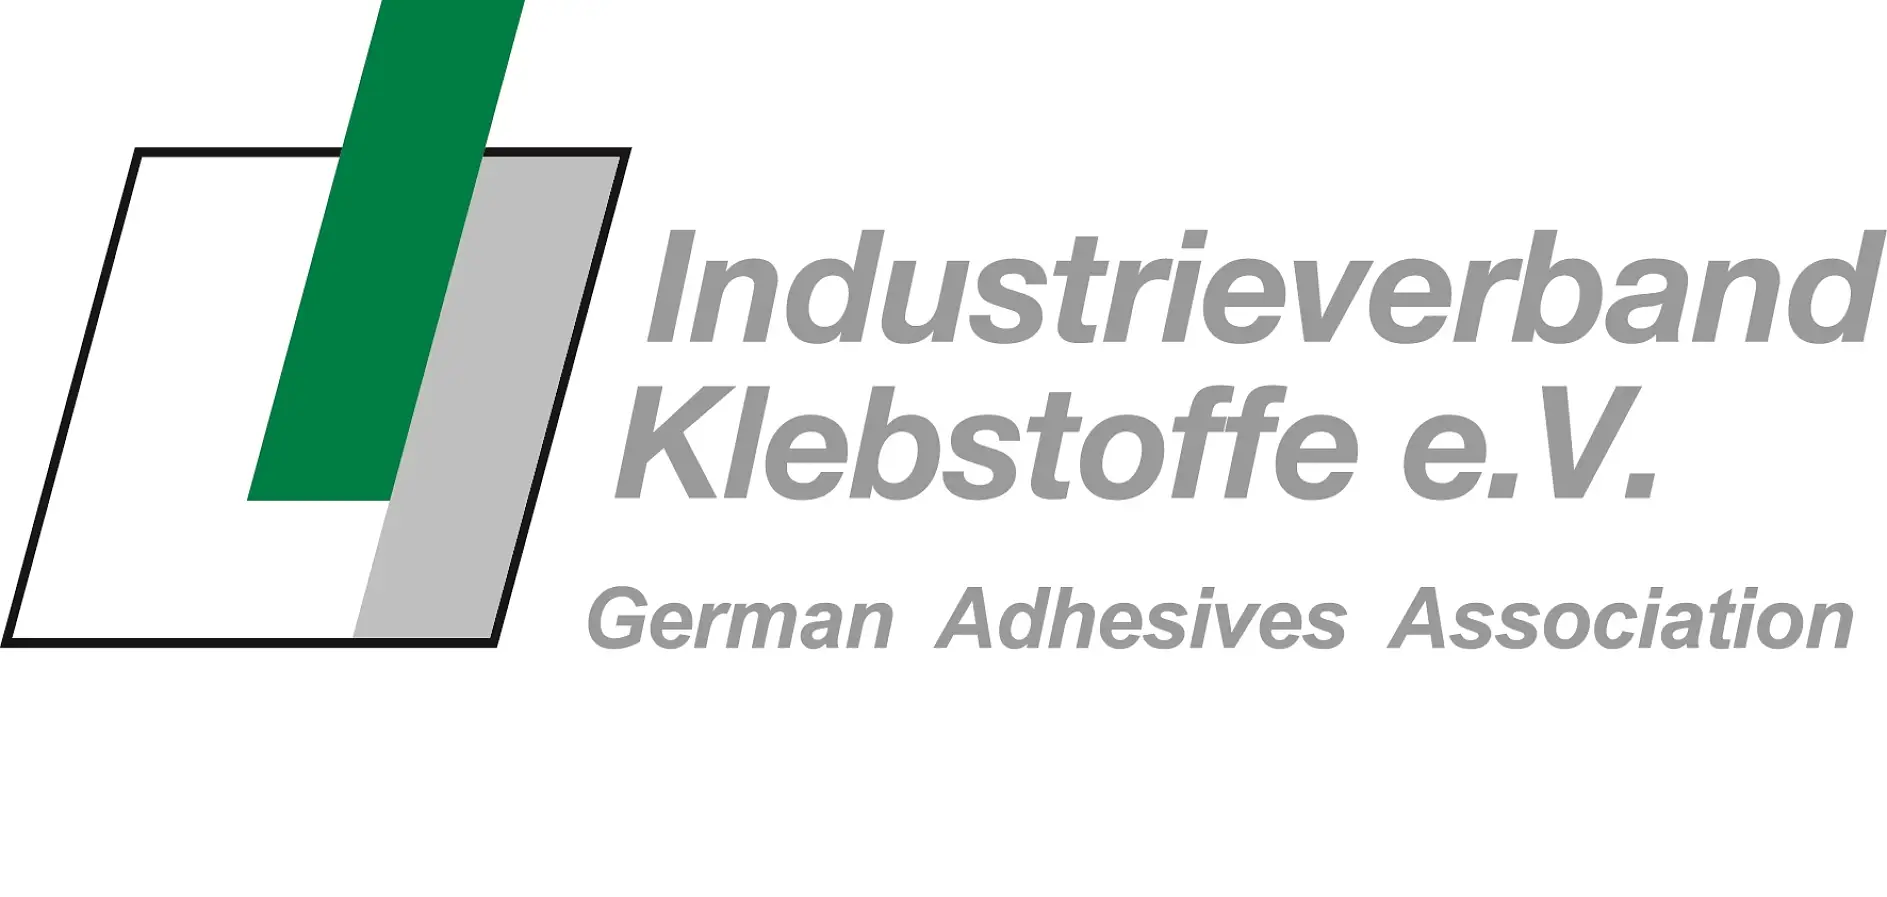 The German Adhesives Association is the world largest - and with respect to its broad service portfolio at the same time the world leading national organization in the field of adhesives bonding technology.